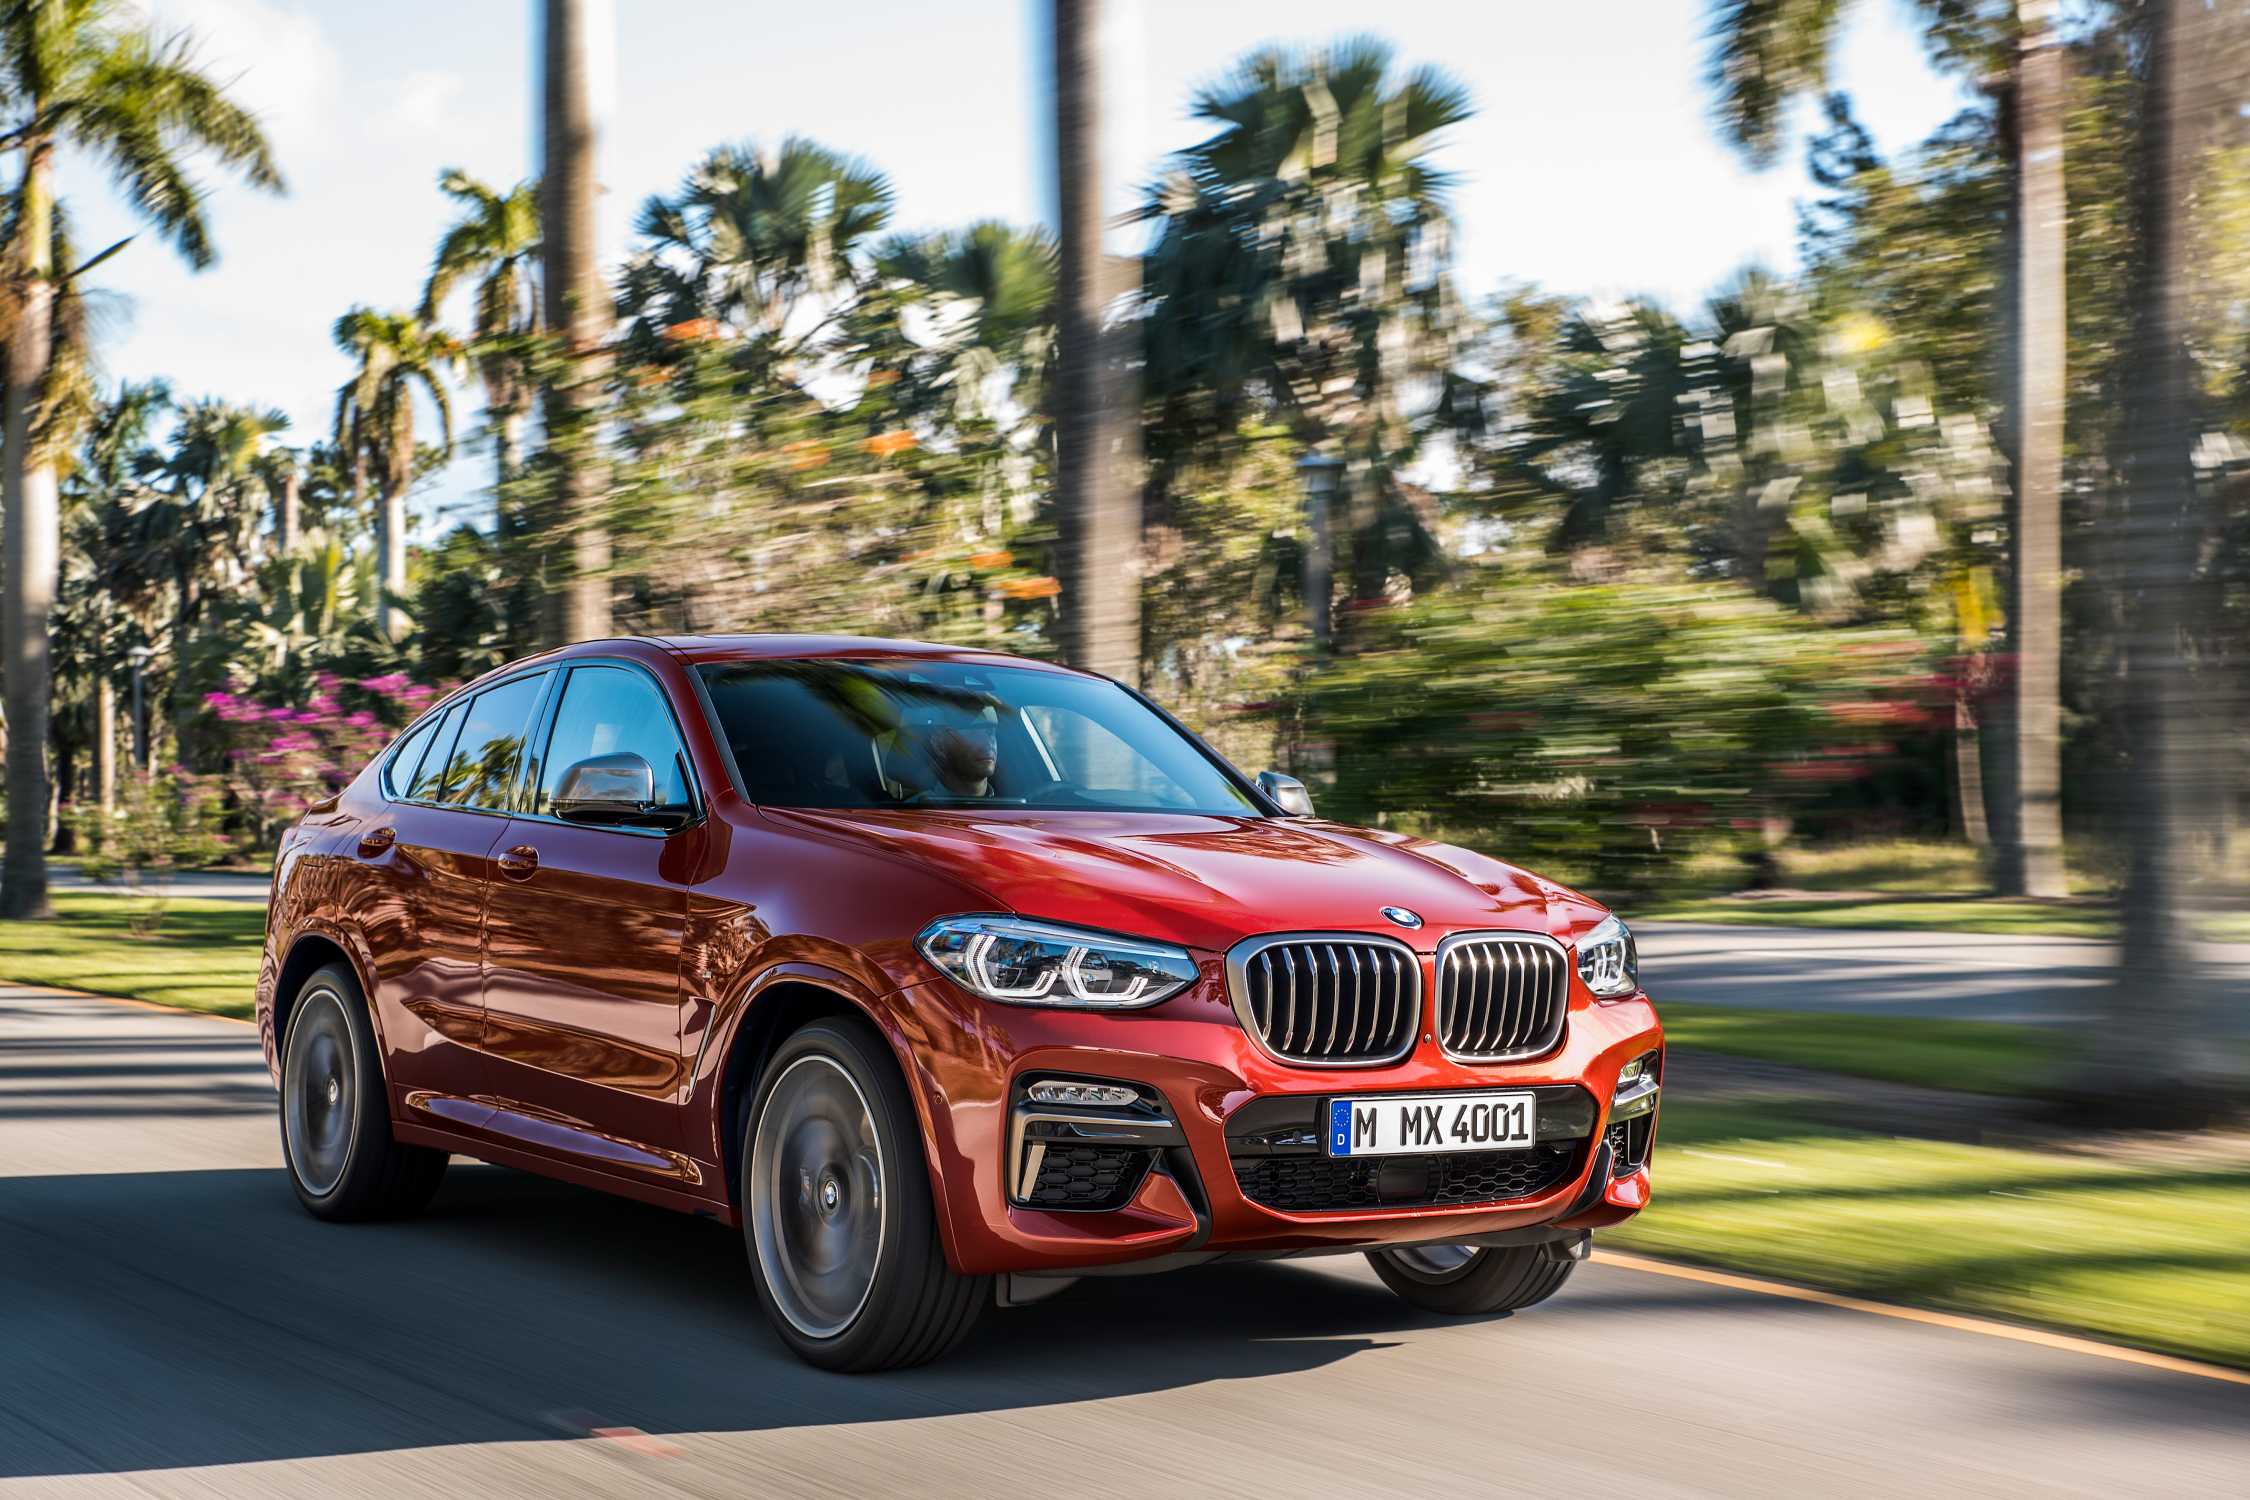 The new BMW X4 M40d (02/2018).